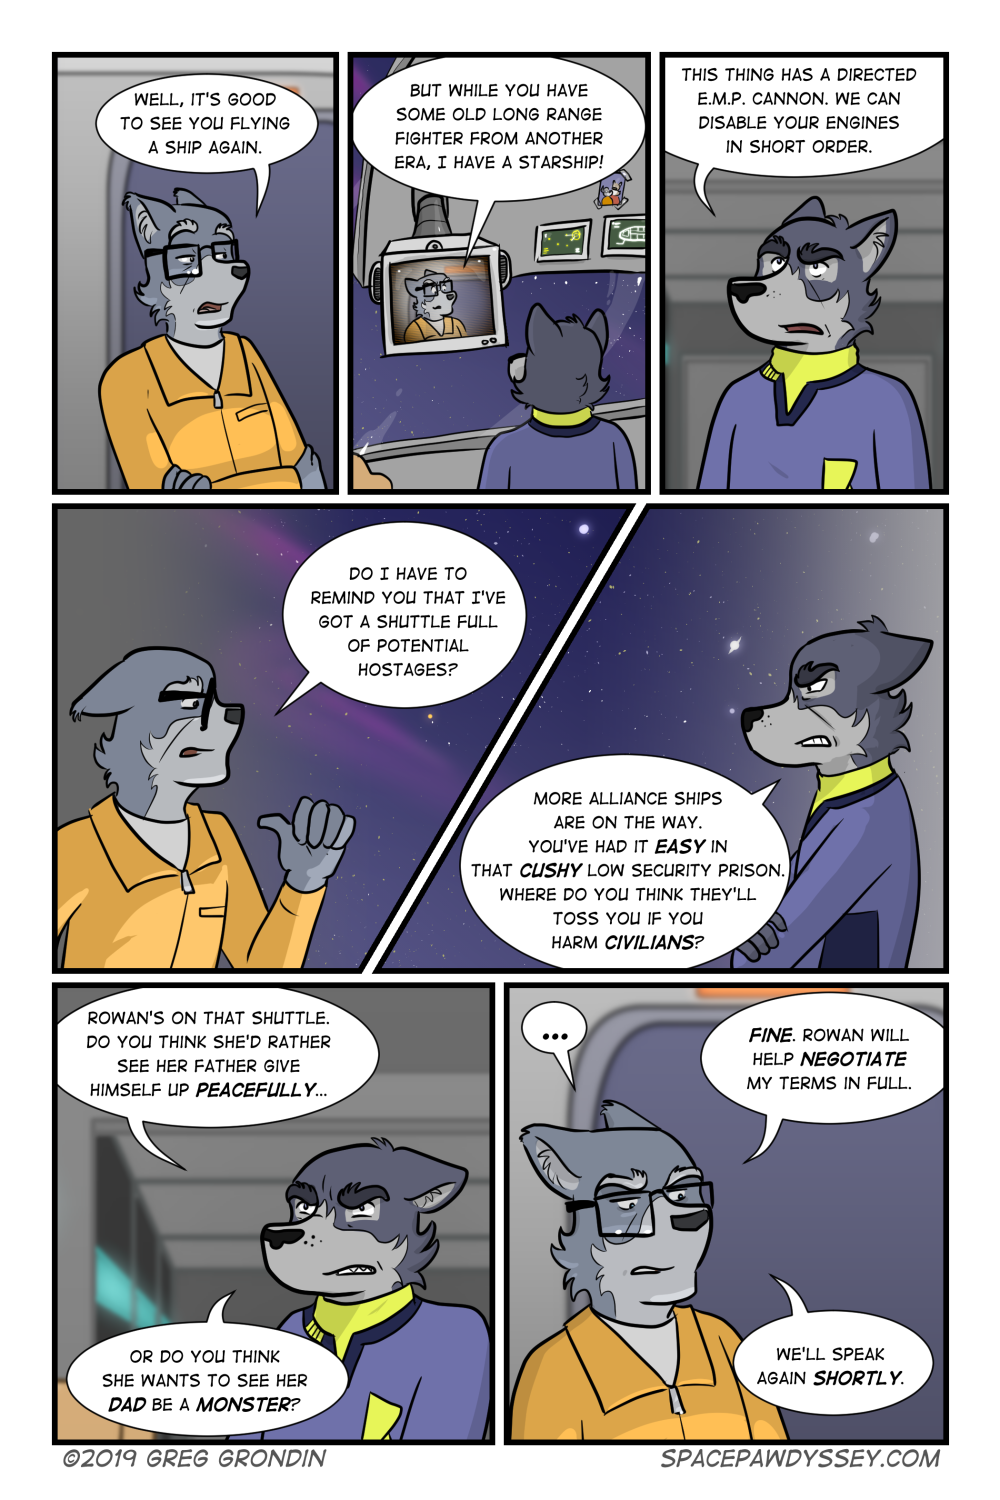 Space Pawdyssey #319